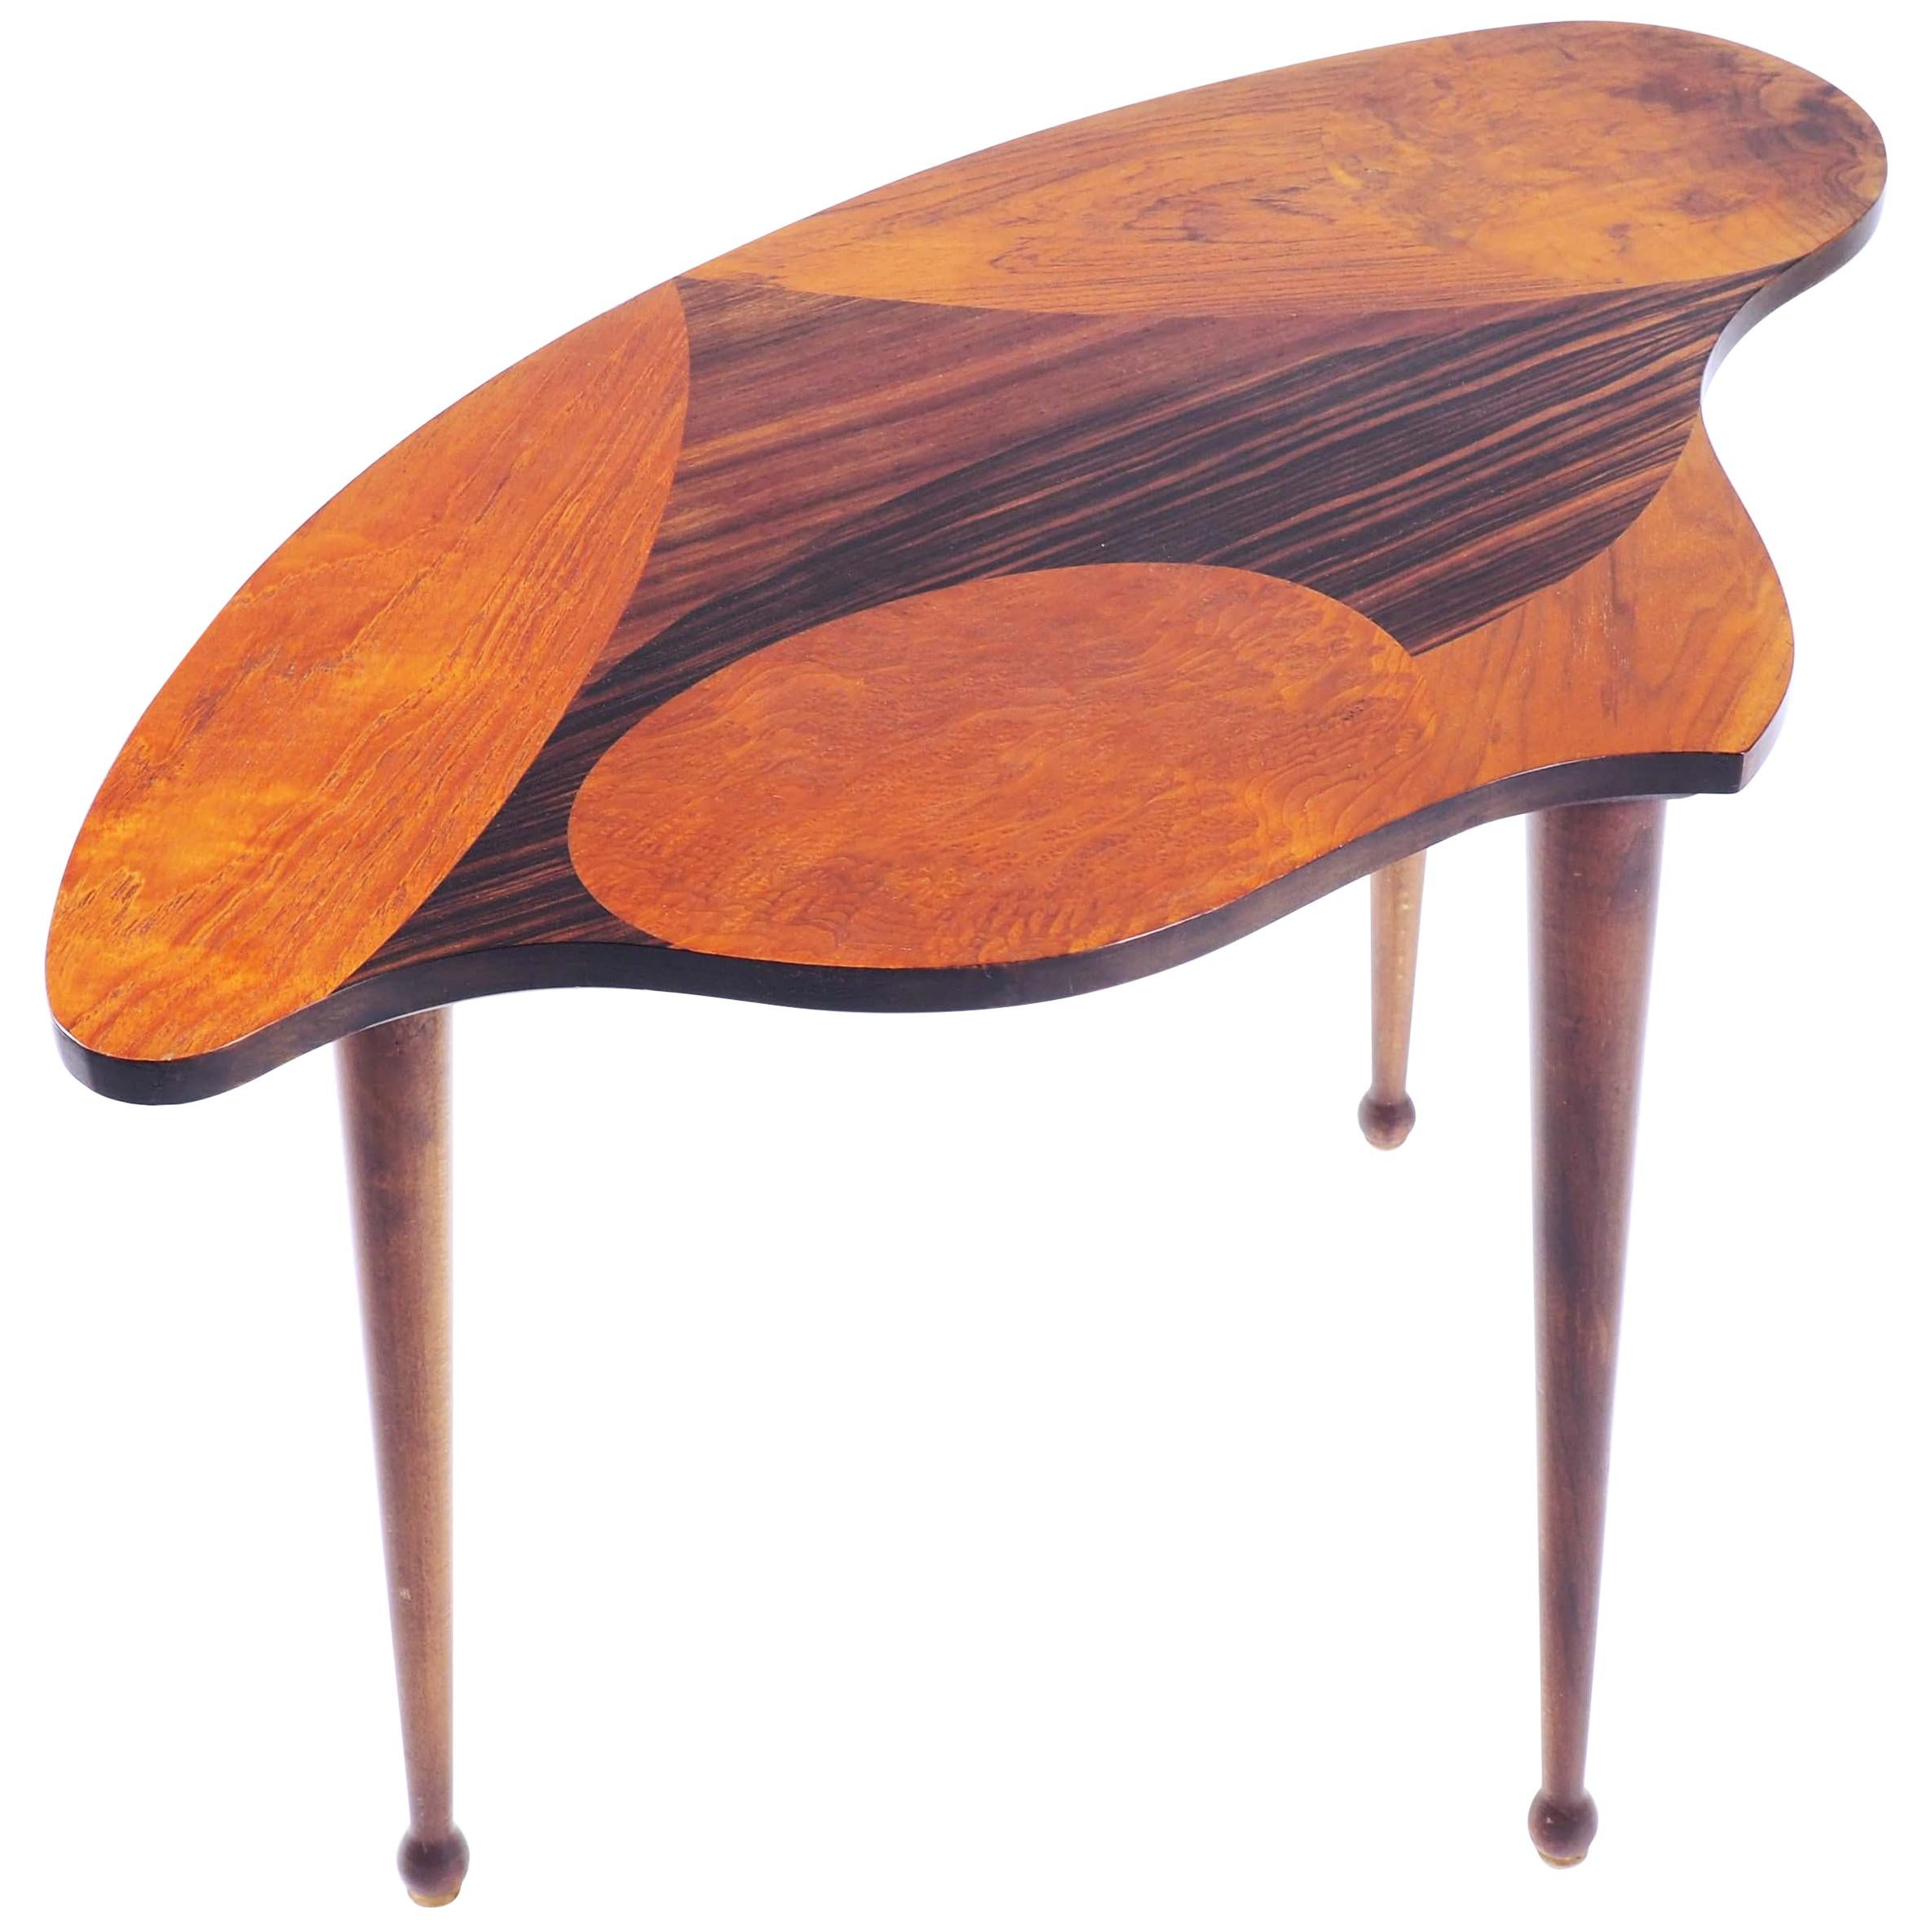 Organic Shaped Swedish Side Table with Inlaid Wood For Sale